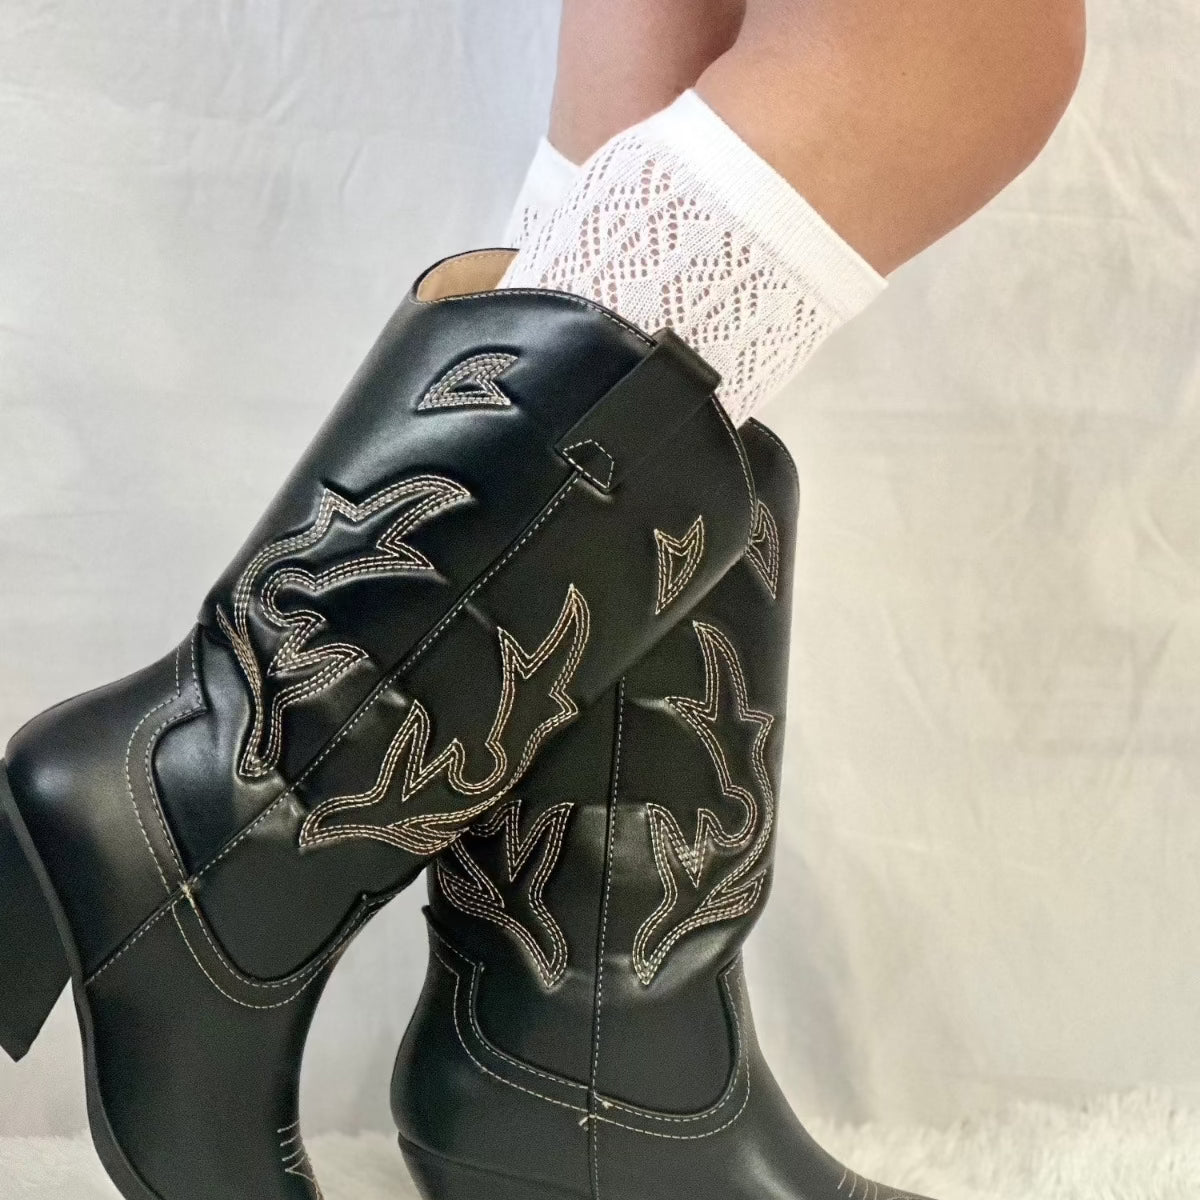 best quality socks cowboy boots, socks to wear with cowboy western boots, tall lace knee high socks women's, shark tank.